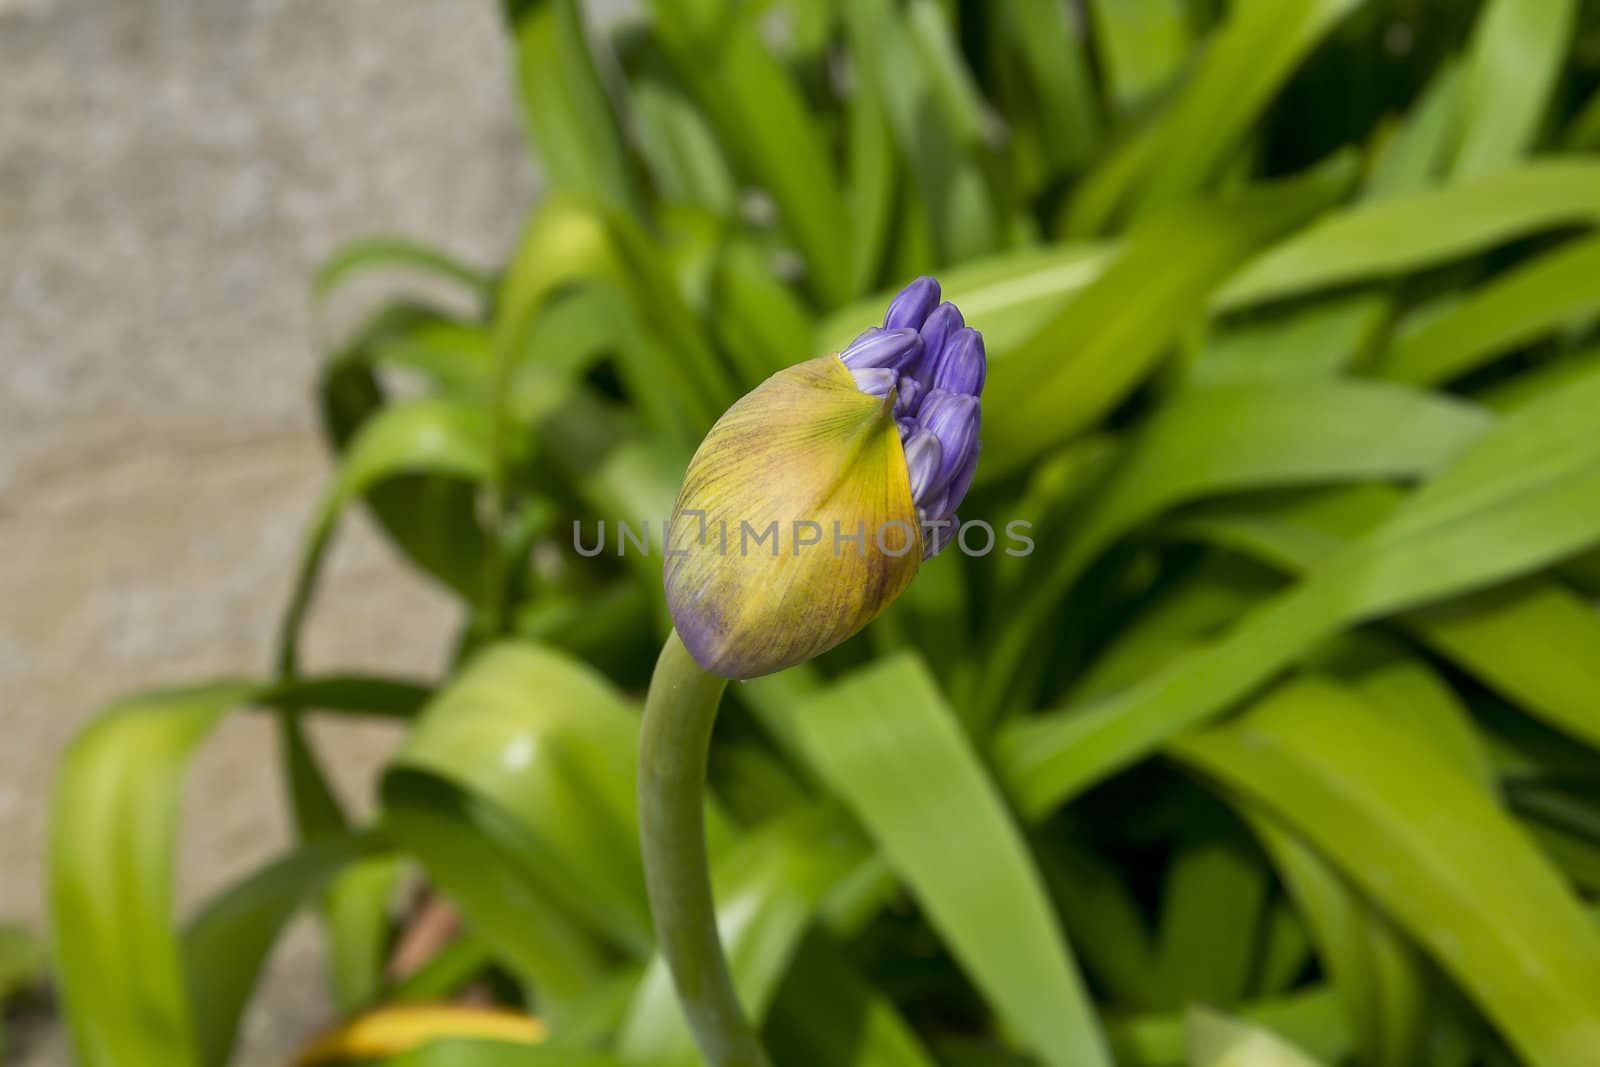 The lovely blue flowers of this lily plant just starting to emerge from their protective covering